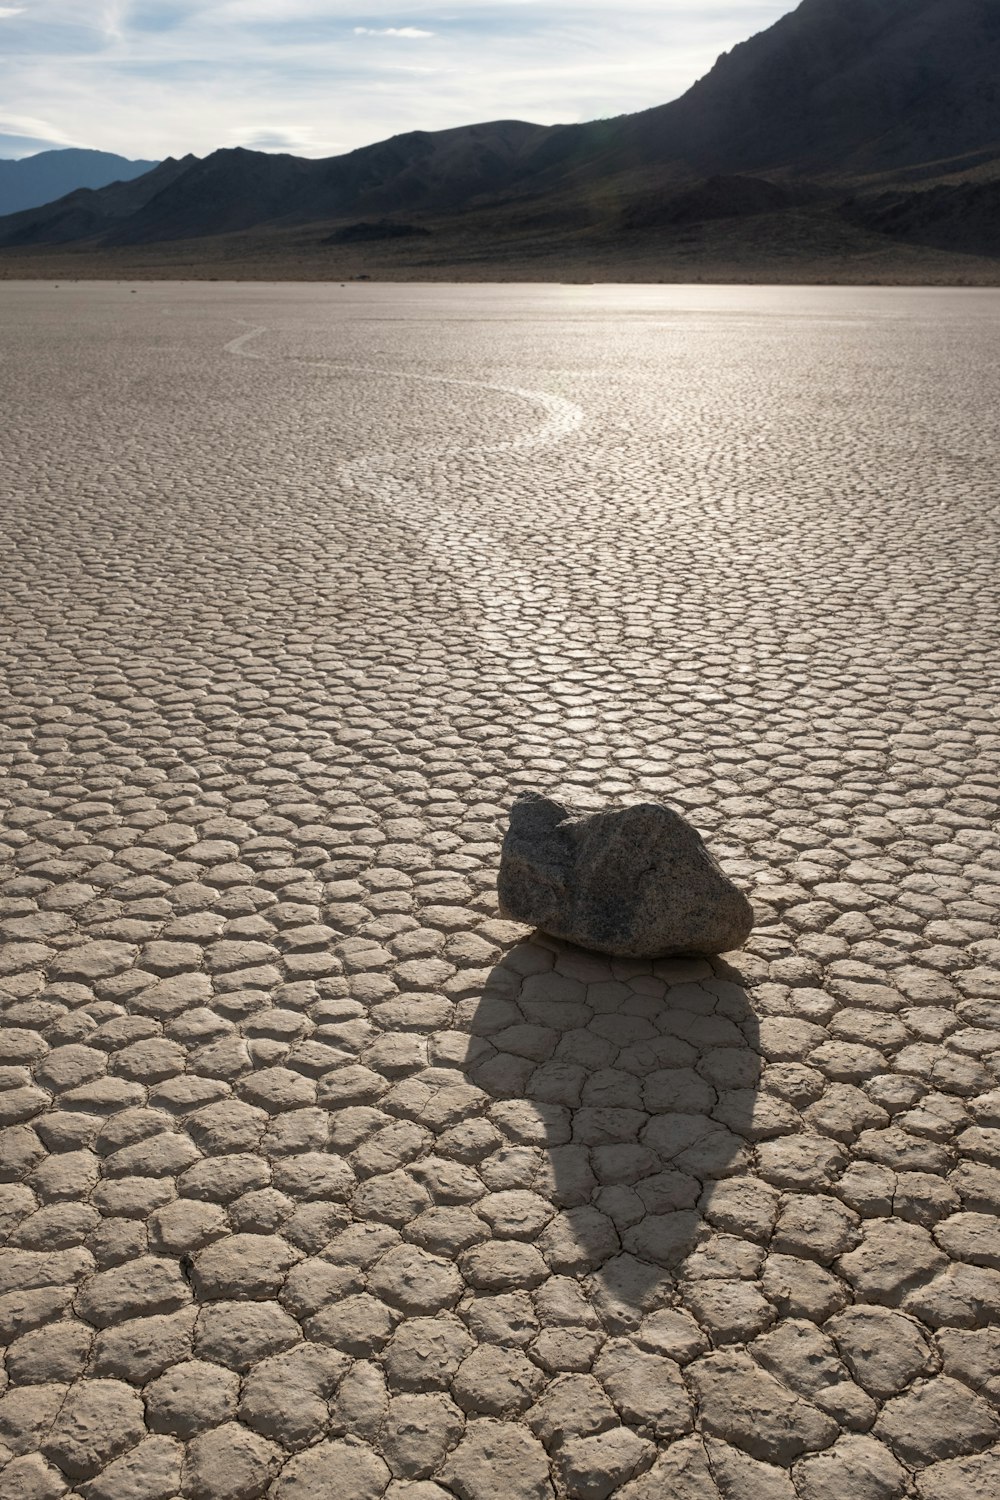 a rock sitting in the middle of a desert